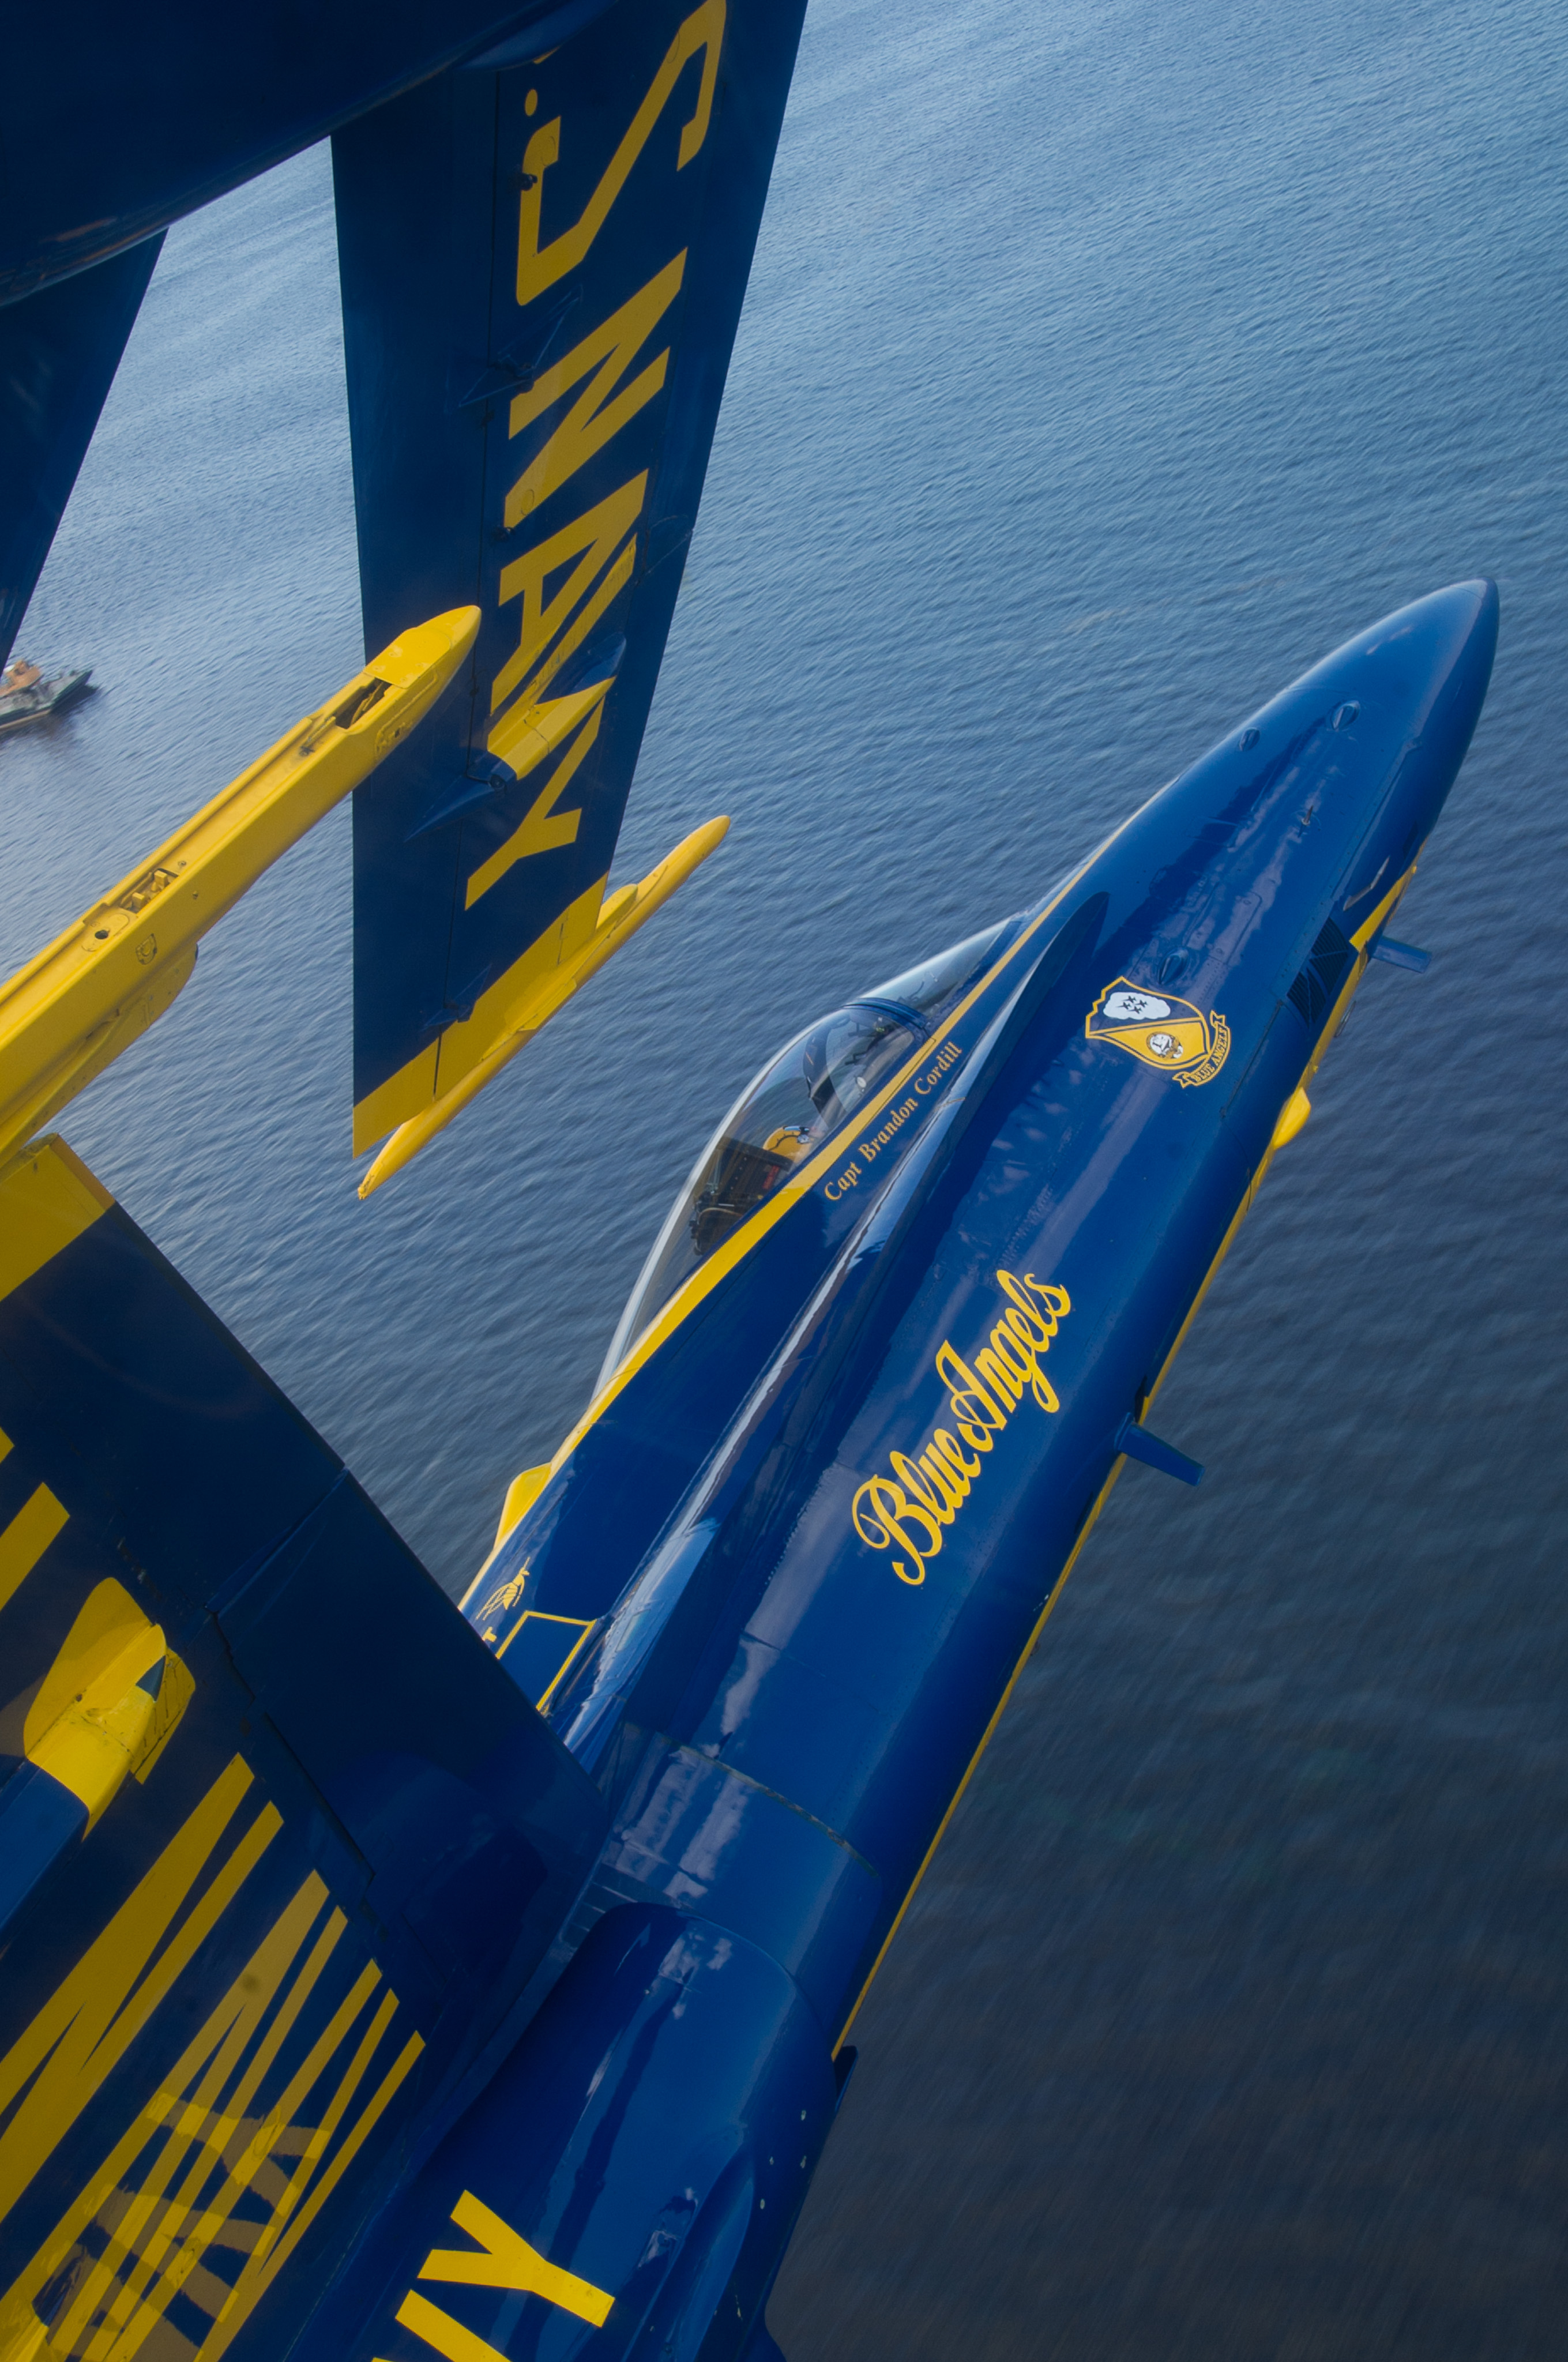 The Blue Angels are Back! | i Love Destin